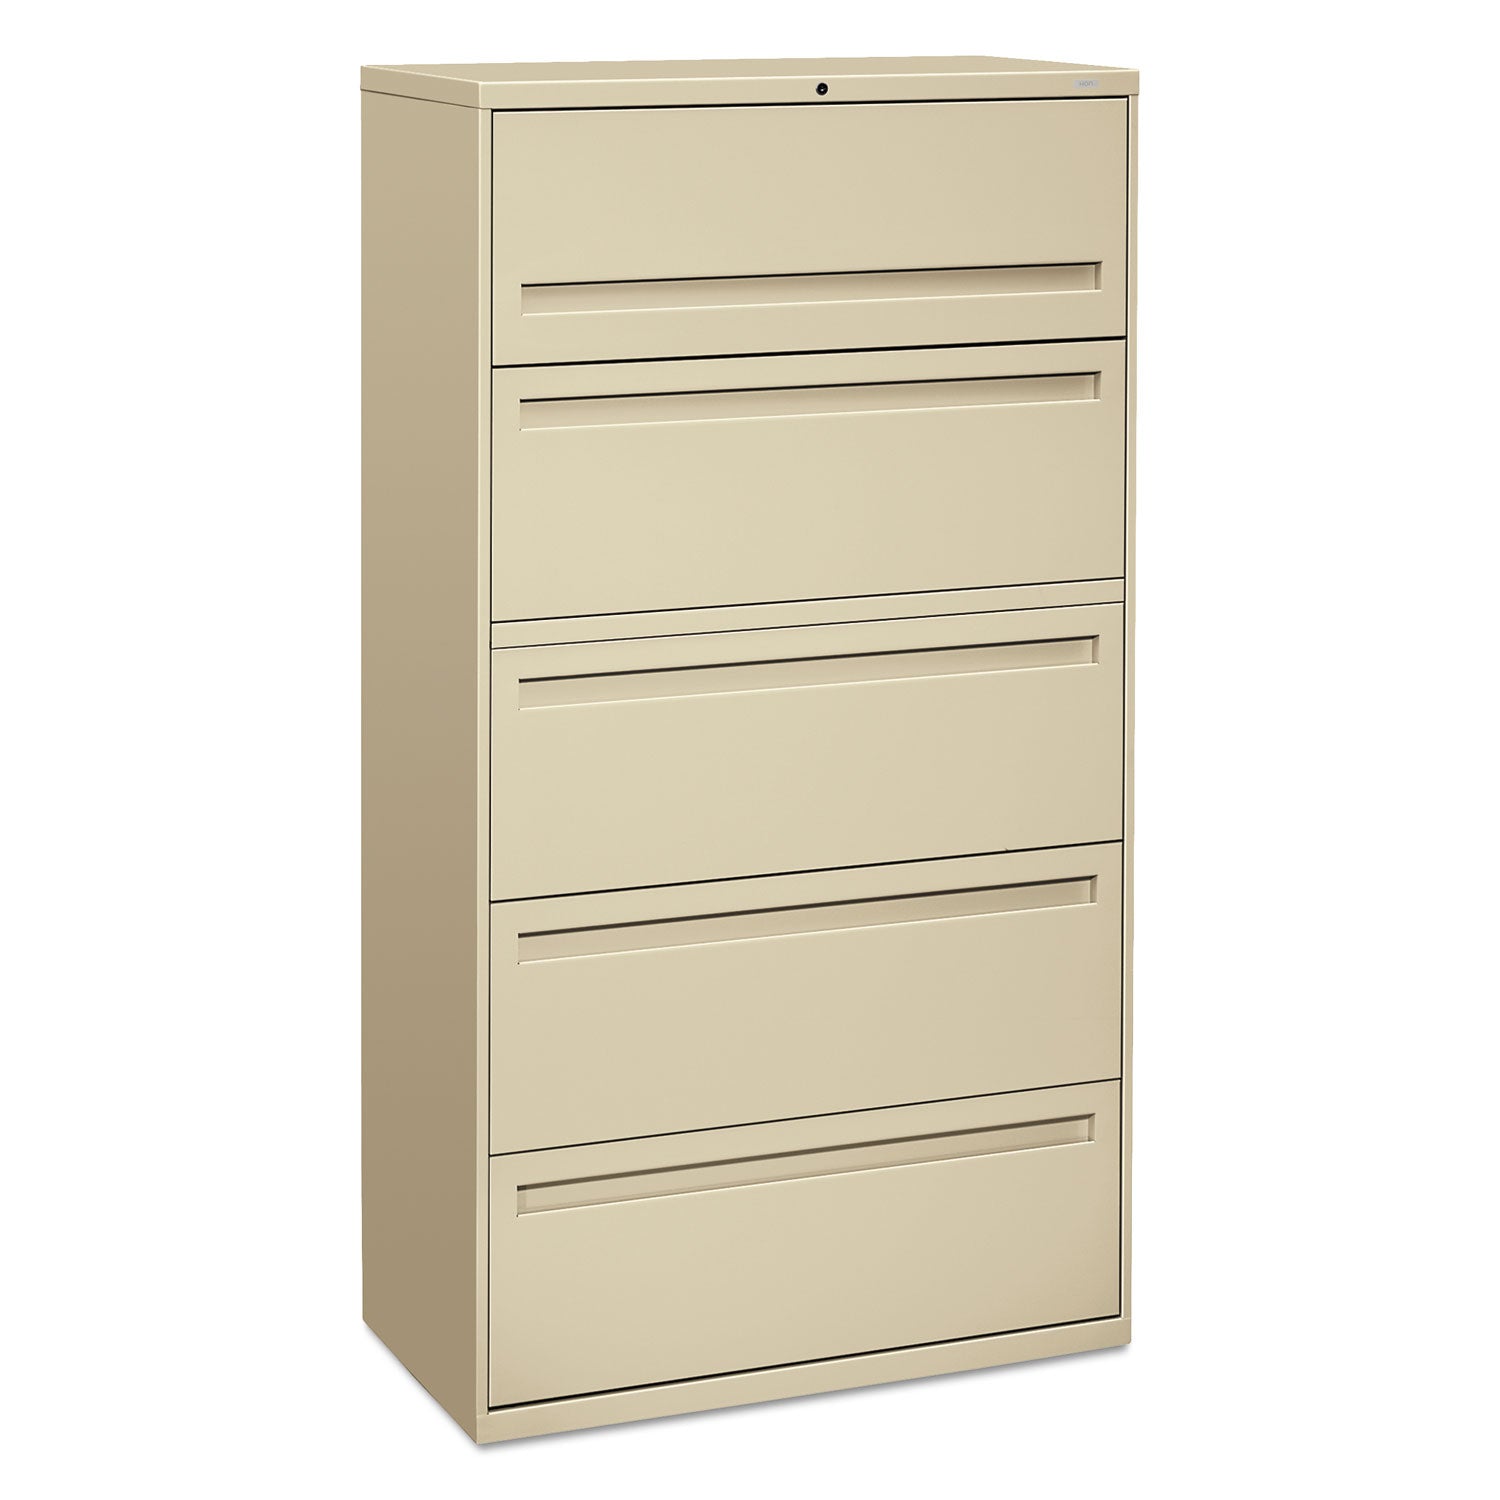 Brigade 700 Series Lateral File, 4 Legal/Letter-Size File Drawers, 1 File Shelf, 1 Post Shelf, Putty, 36